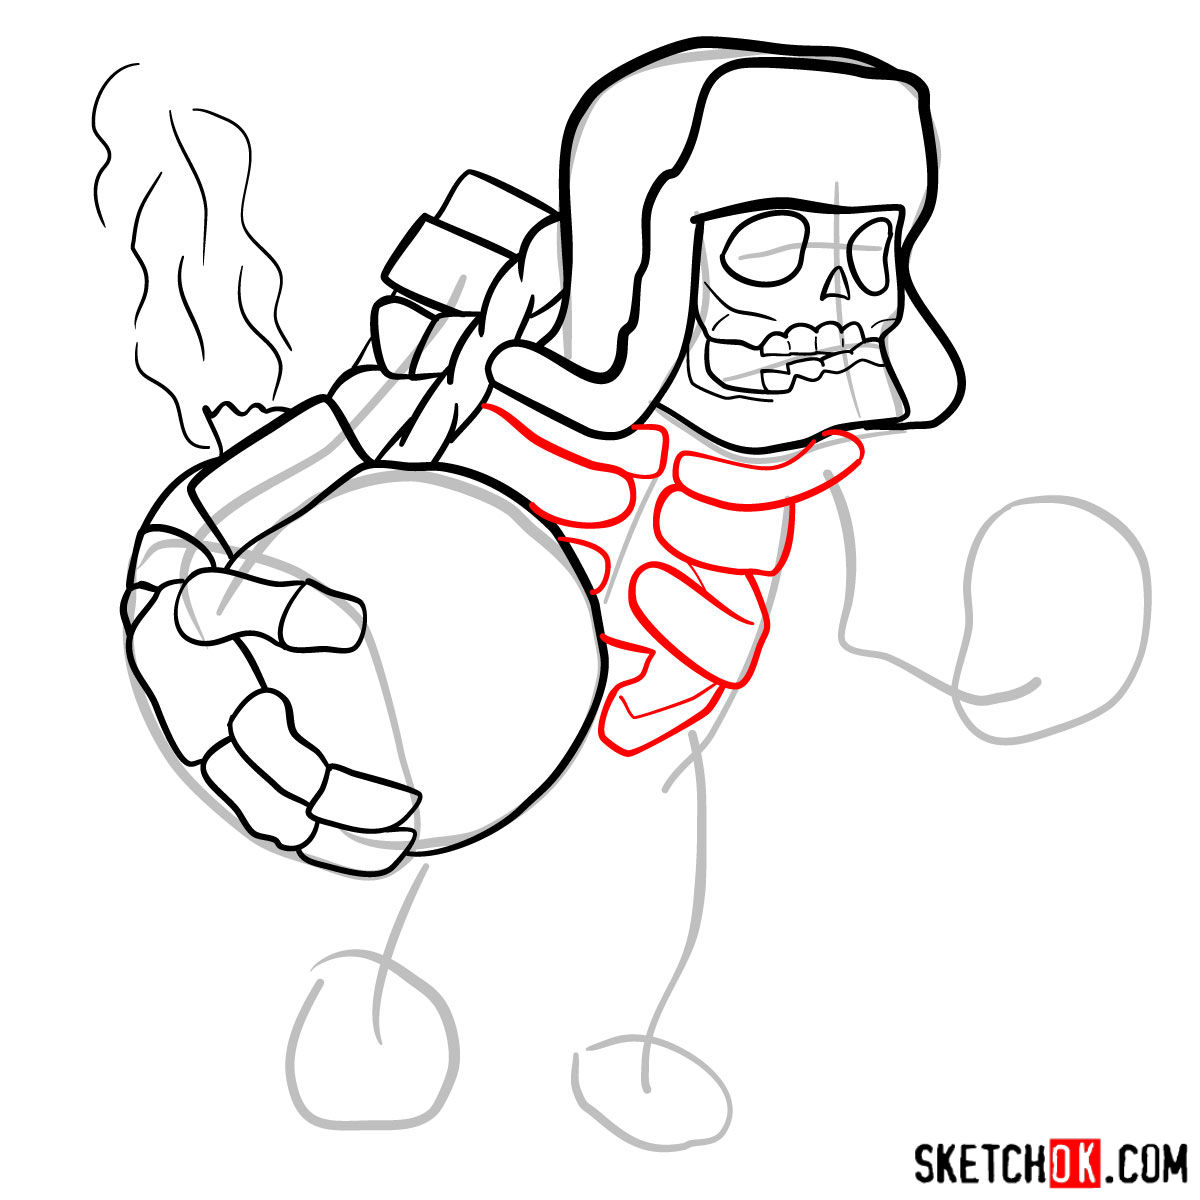 How to draw Giant Skeleton from Clash of Clans - step 07